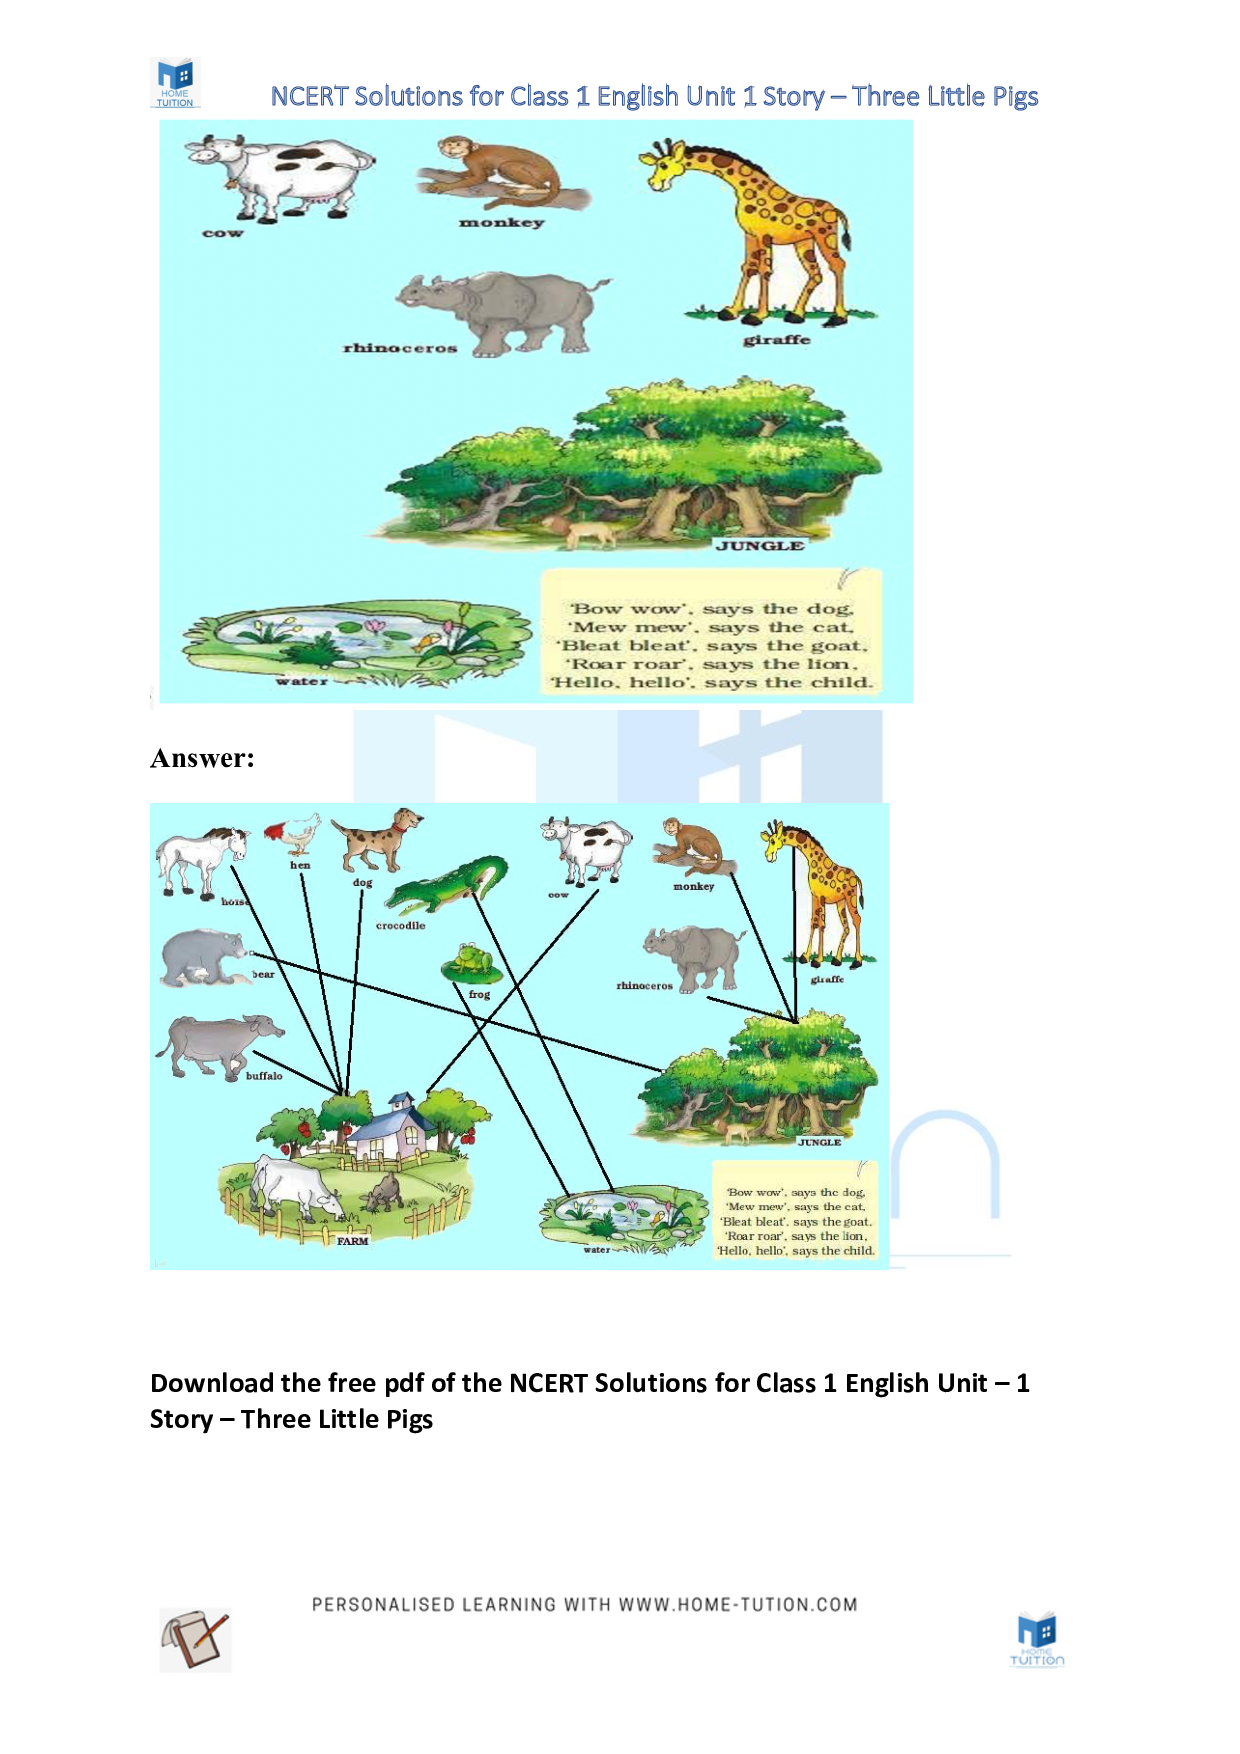 NCERT Solutions for Class 1 English Unit 1 Story - Three Little Pigs